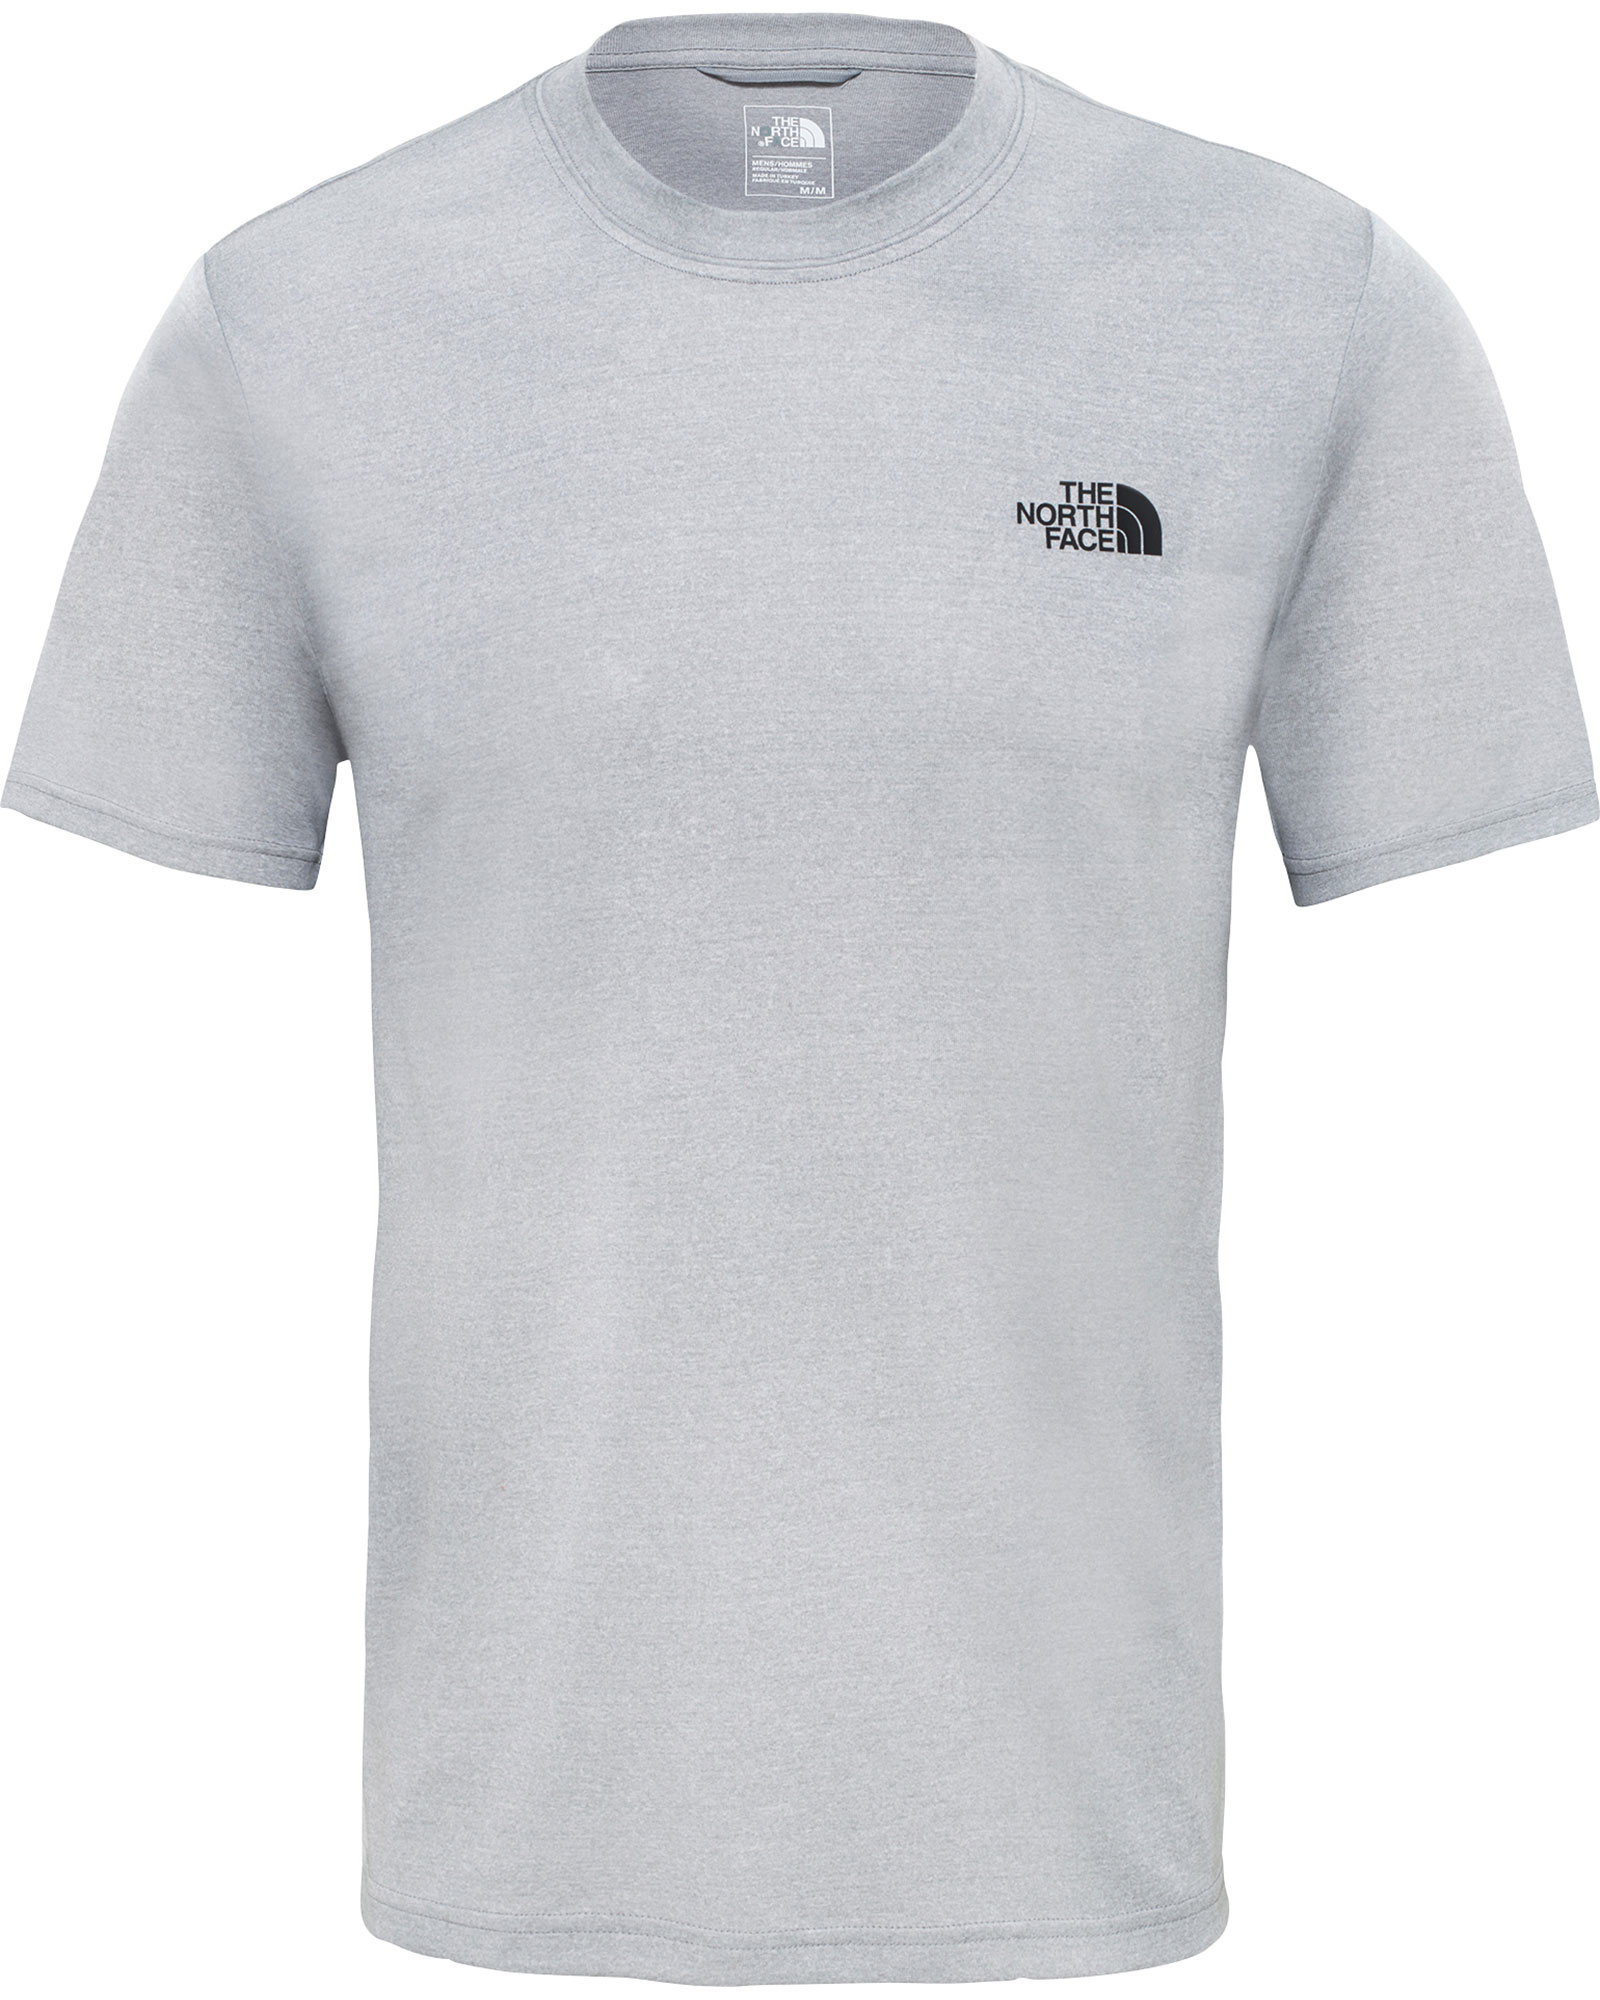 The North Face Reaxion Amp Men’s Crew T Shirt - TNF Light Grey Heather XS